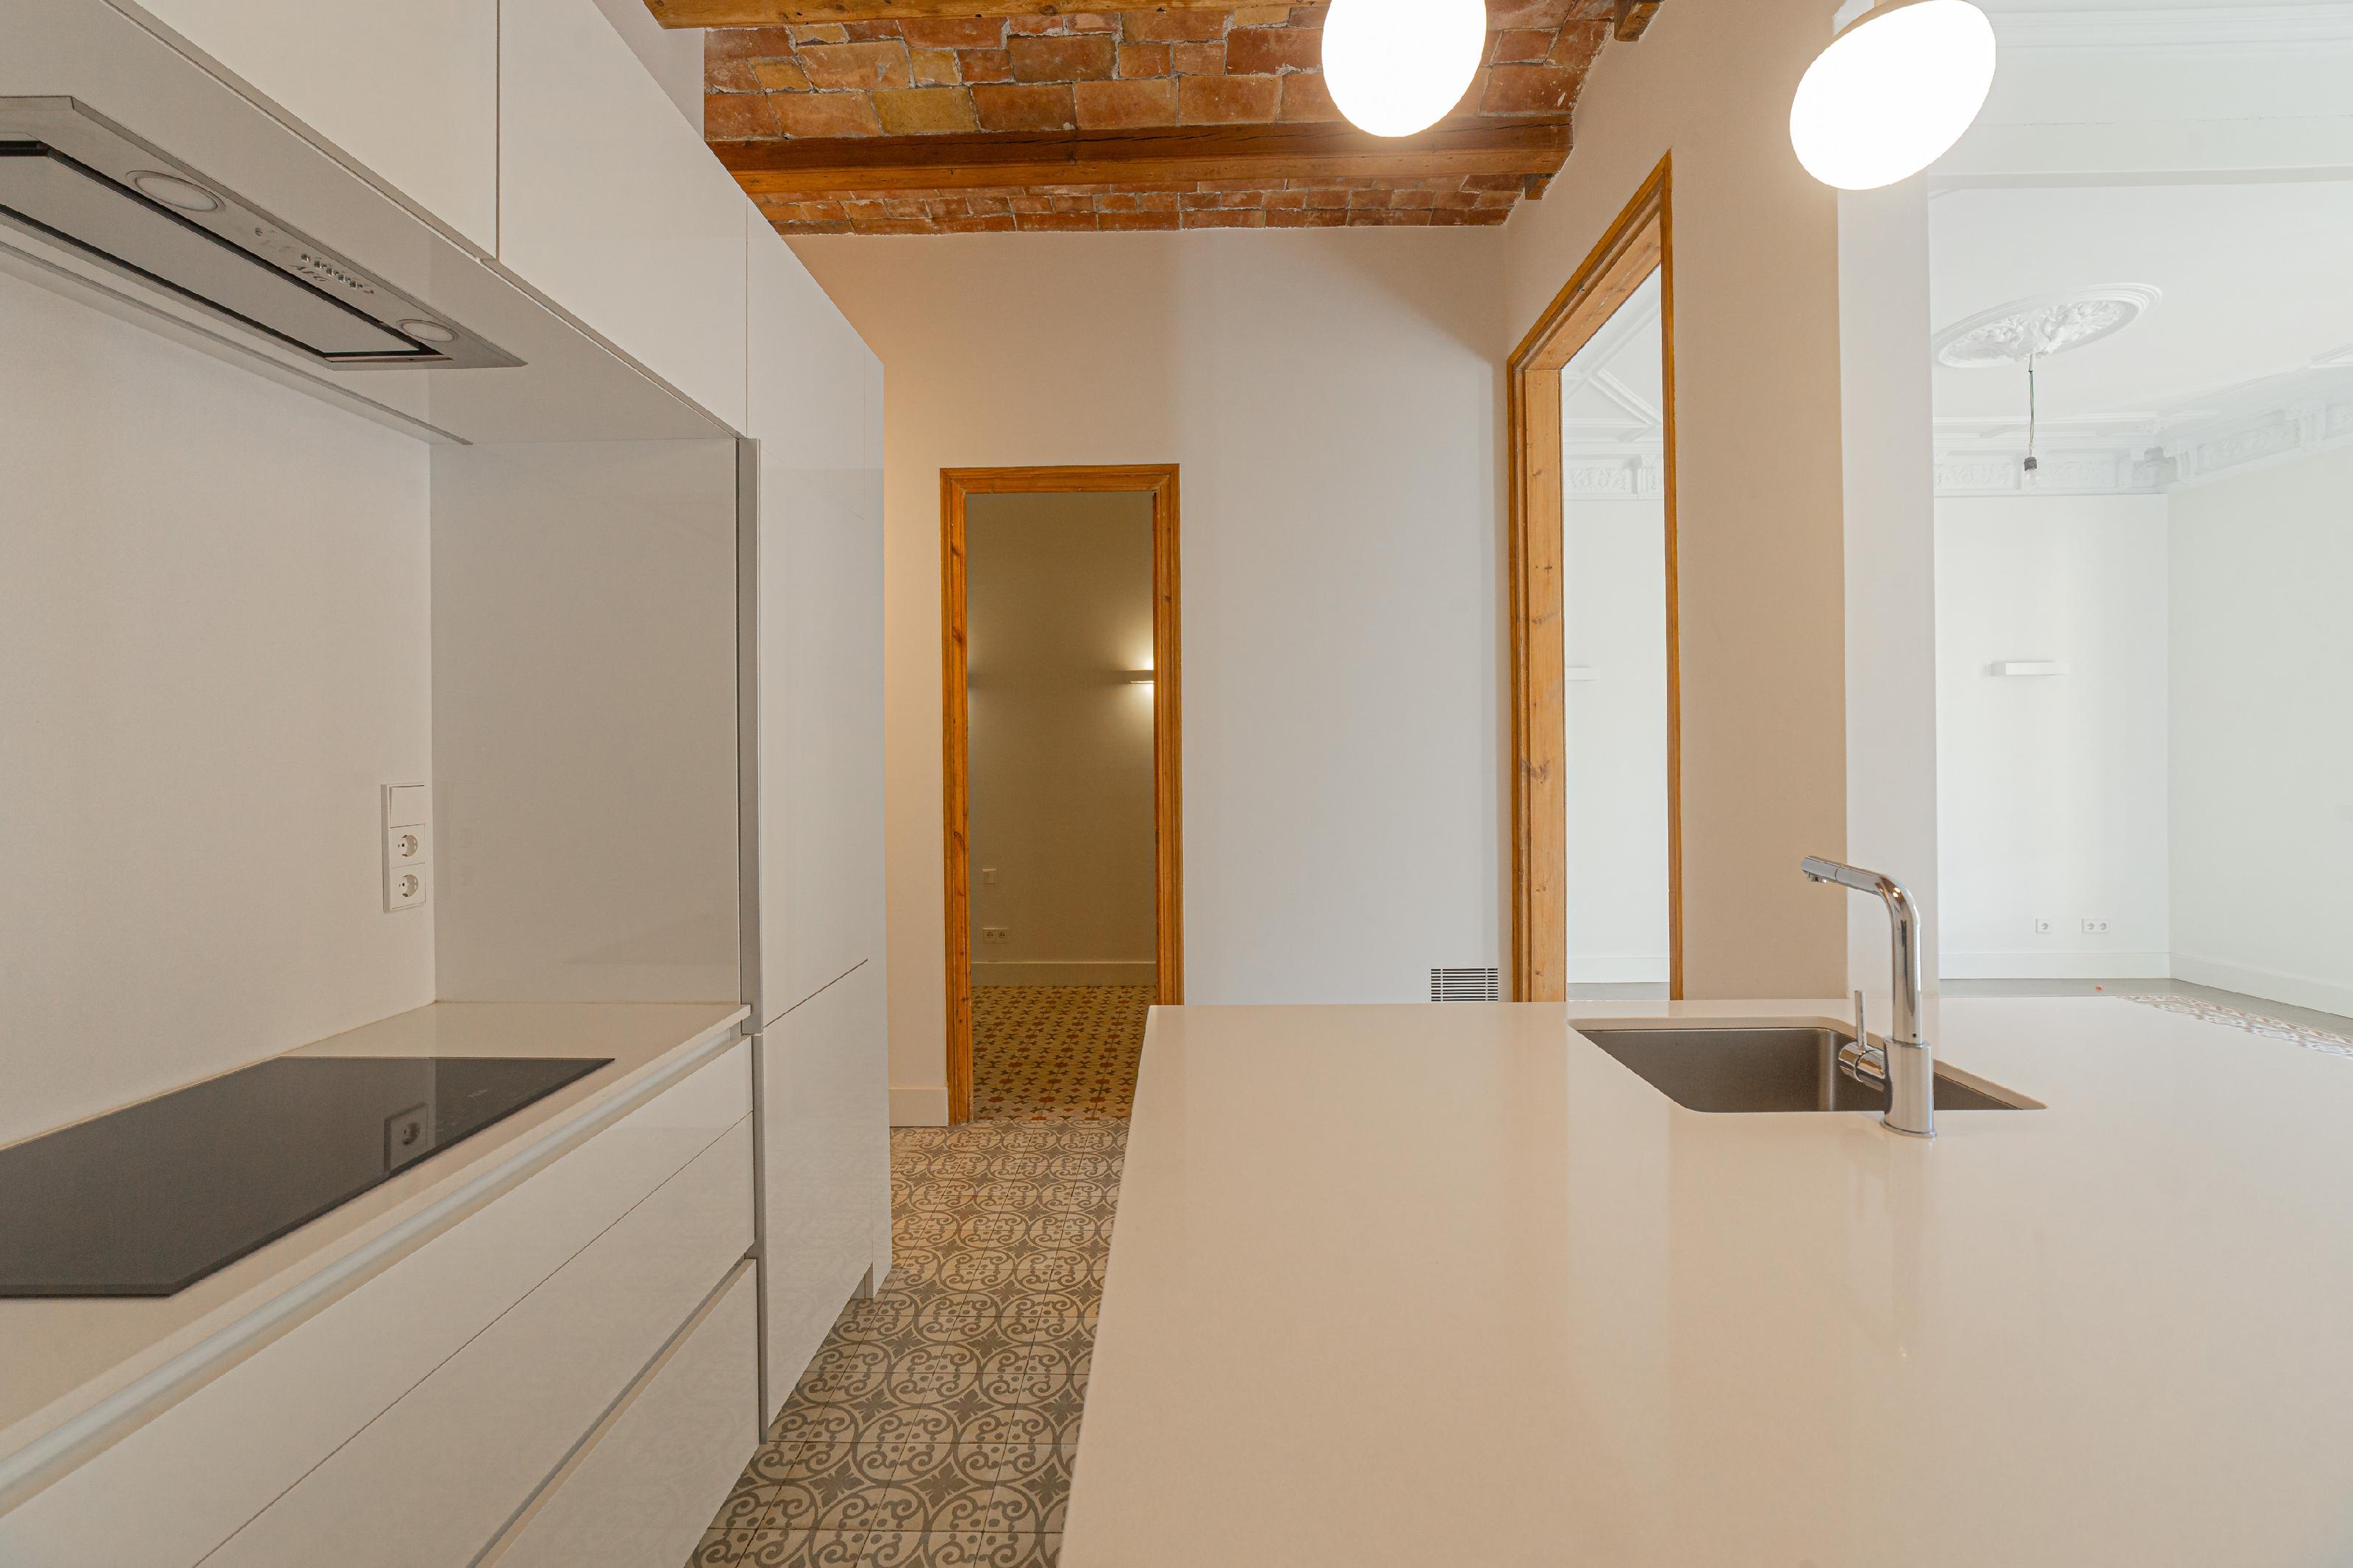 275557 Flat for sale in Eixample, Old Esquerre Eixample 15